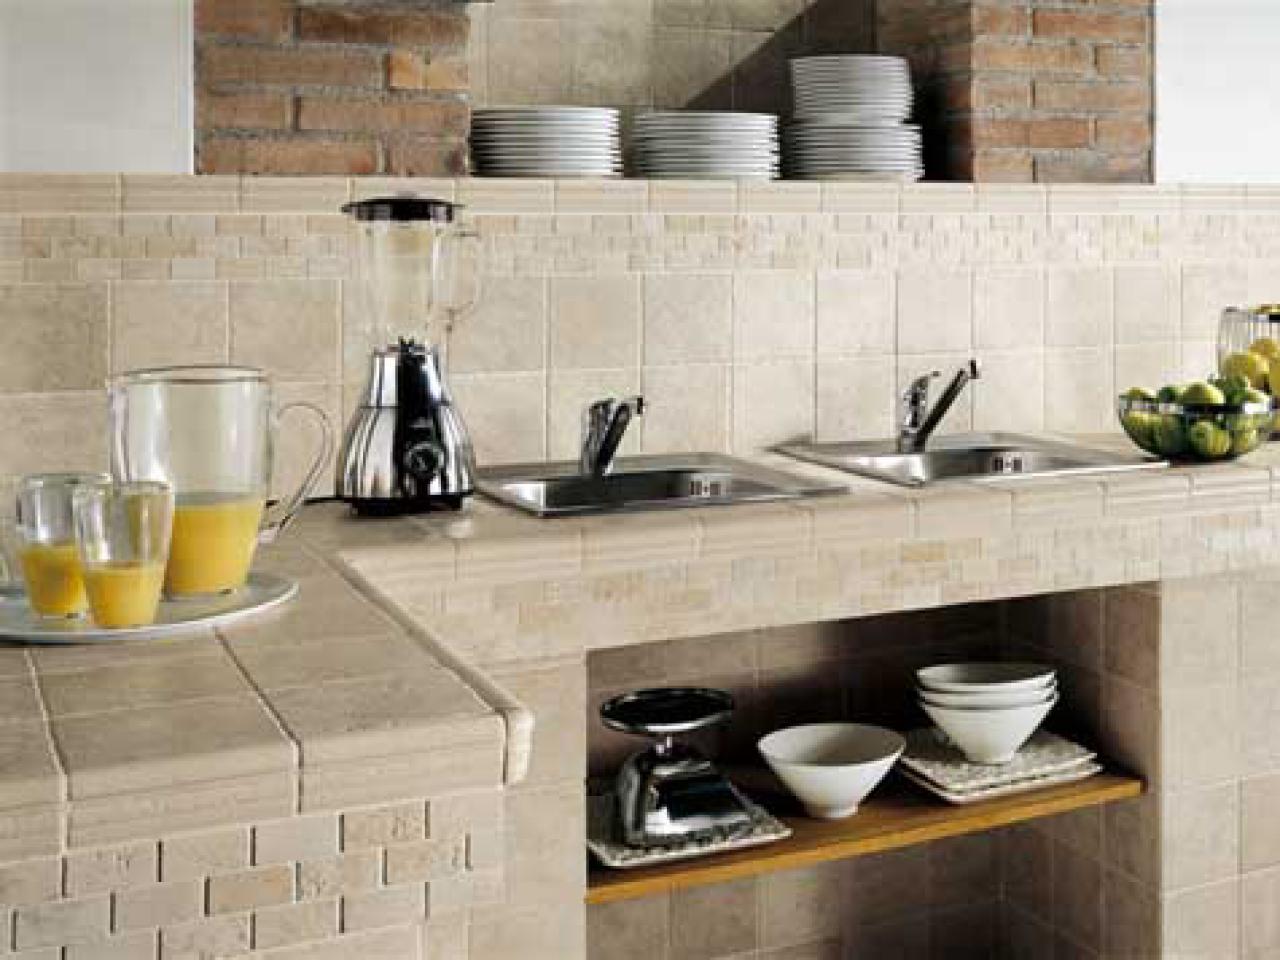 Tile Kitchen Countertops Pictures Ideas From HGTV HGTV